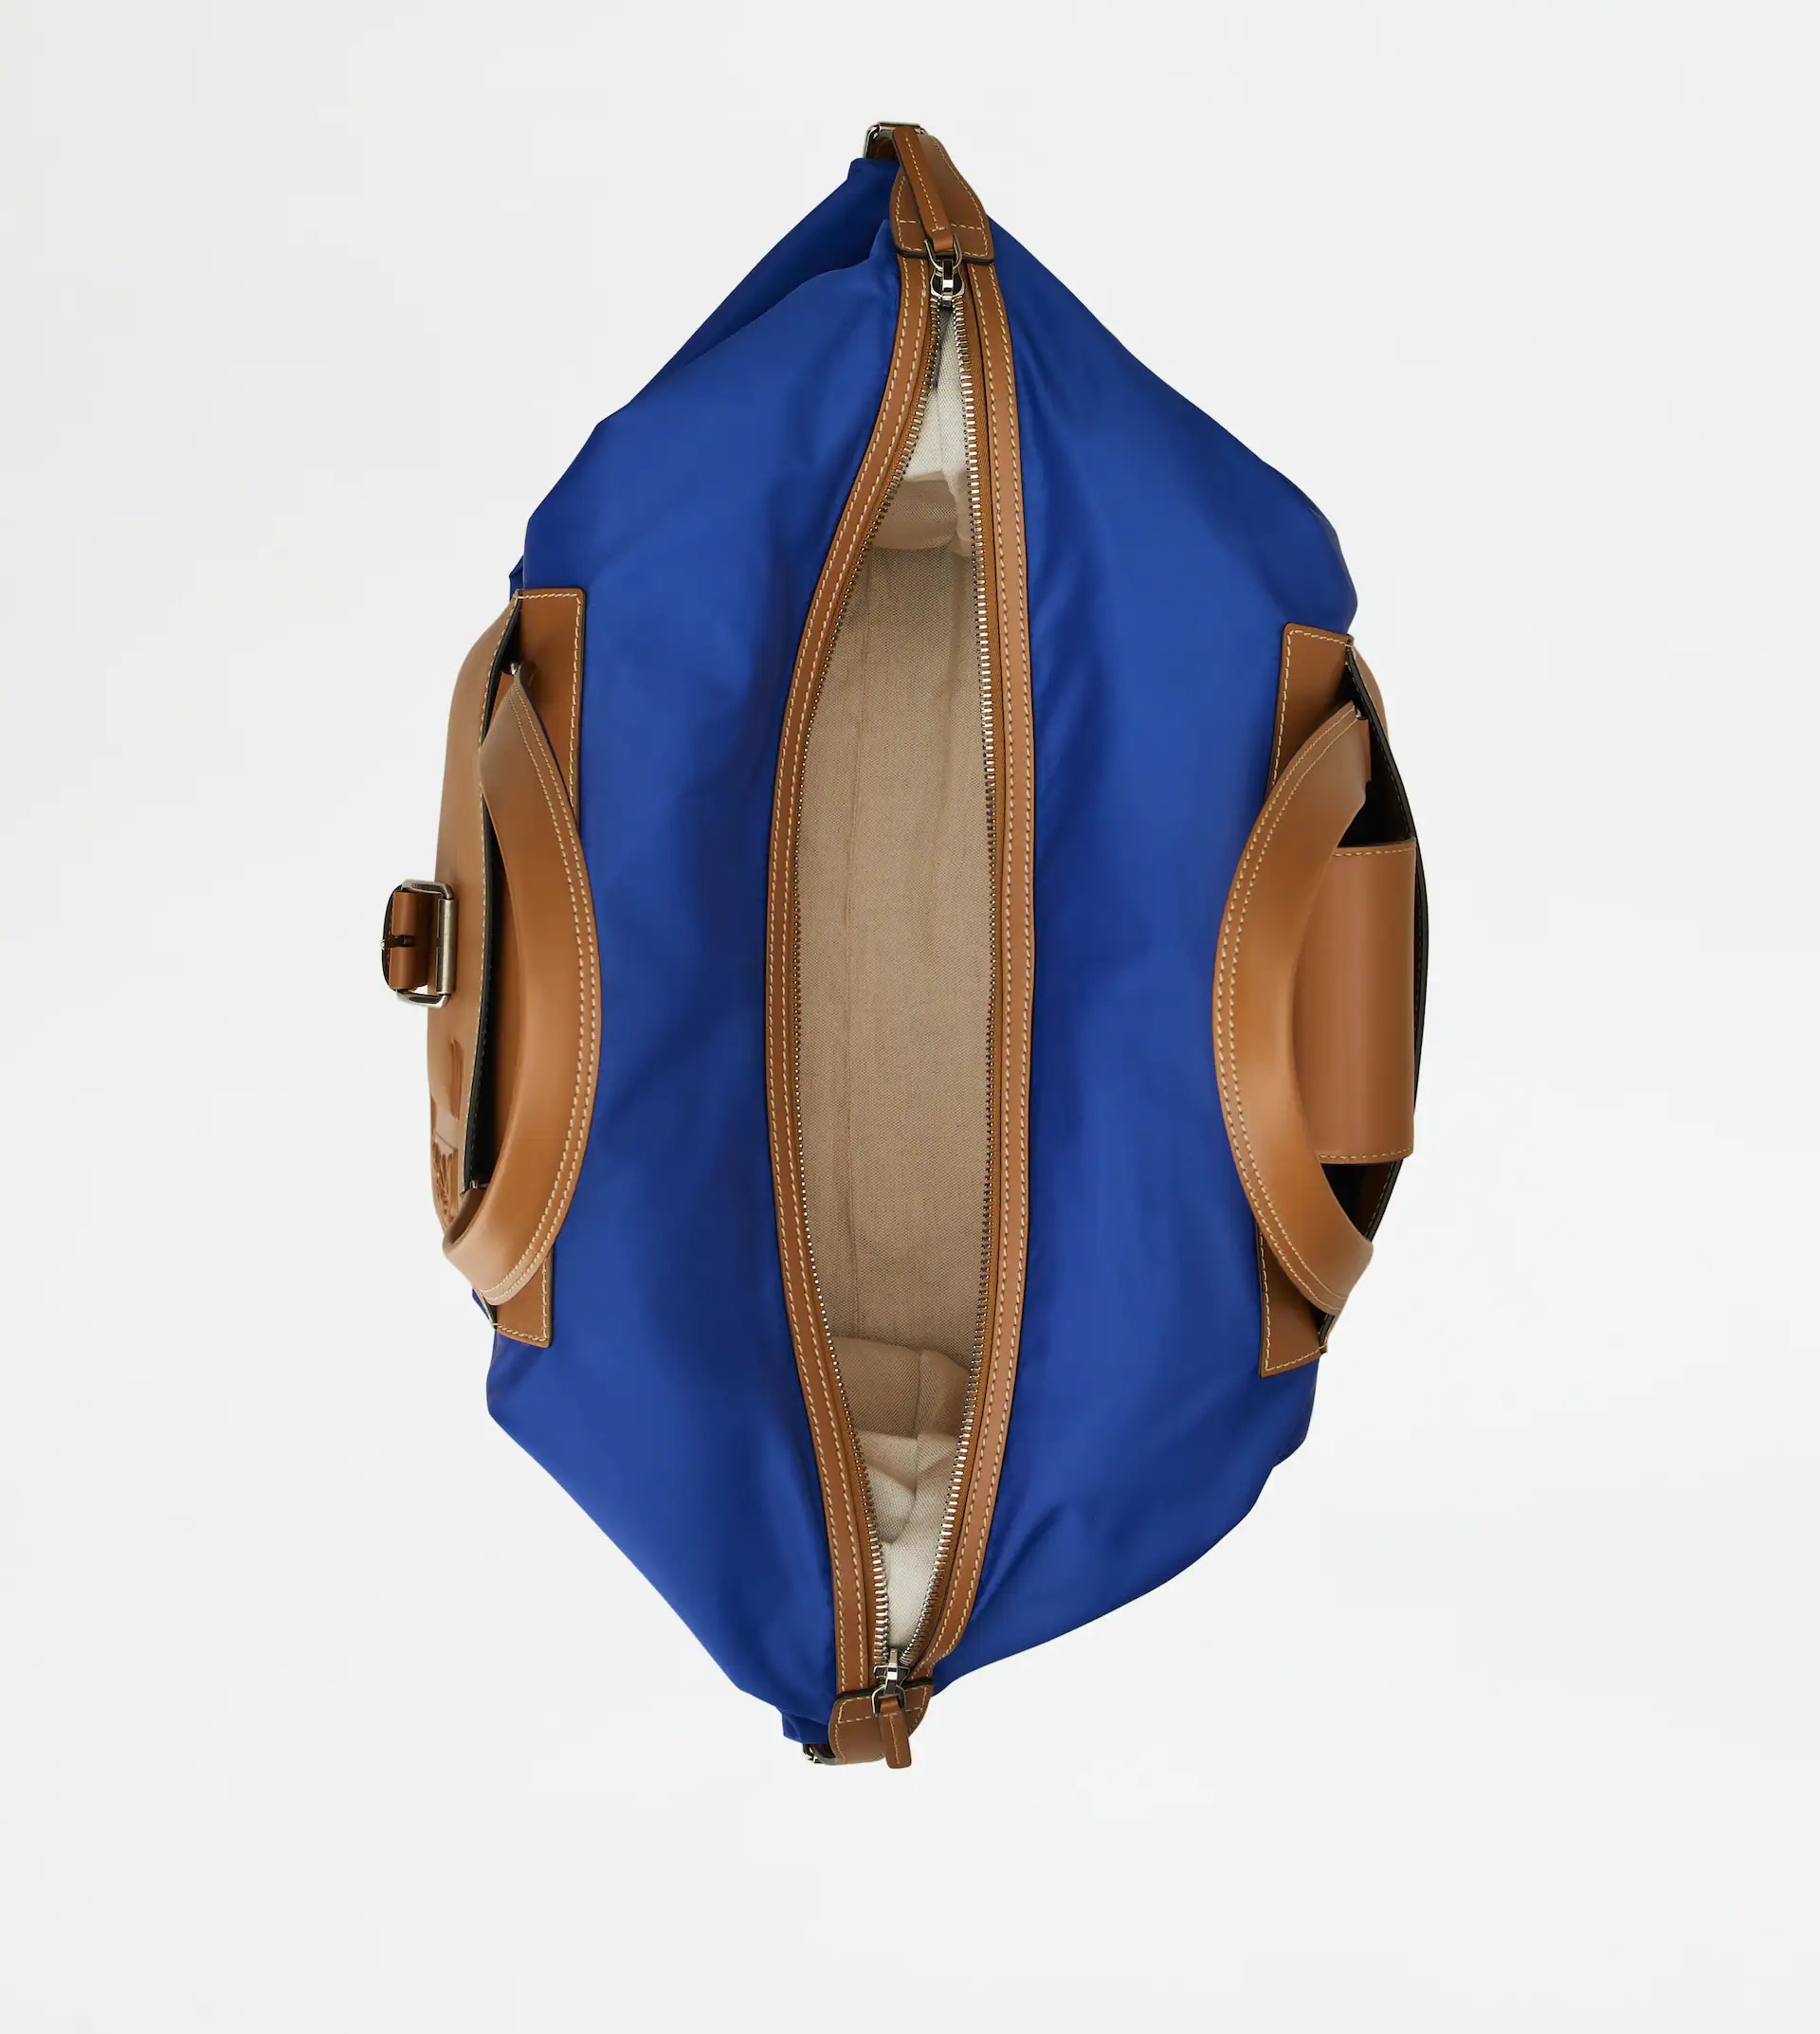 DUFFLE BAG IN FABRIC AND LEATHER MEDIUM - BLUE, BROWN - 5